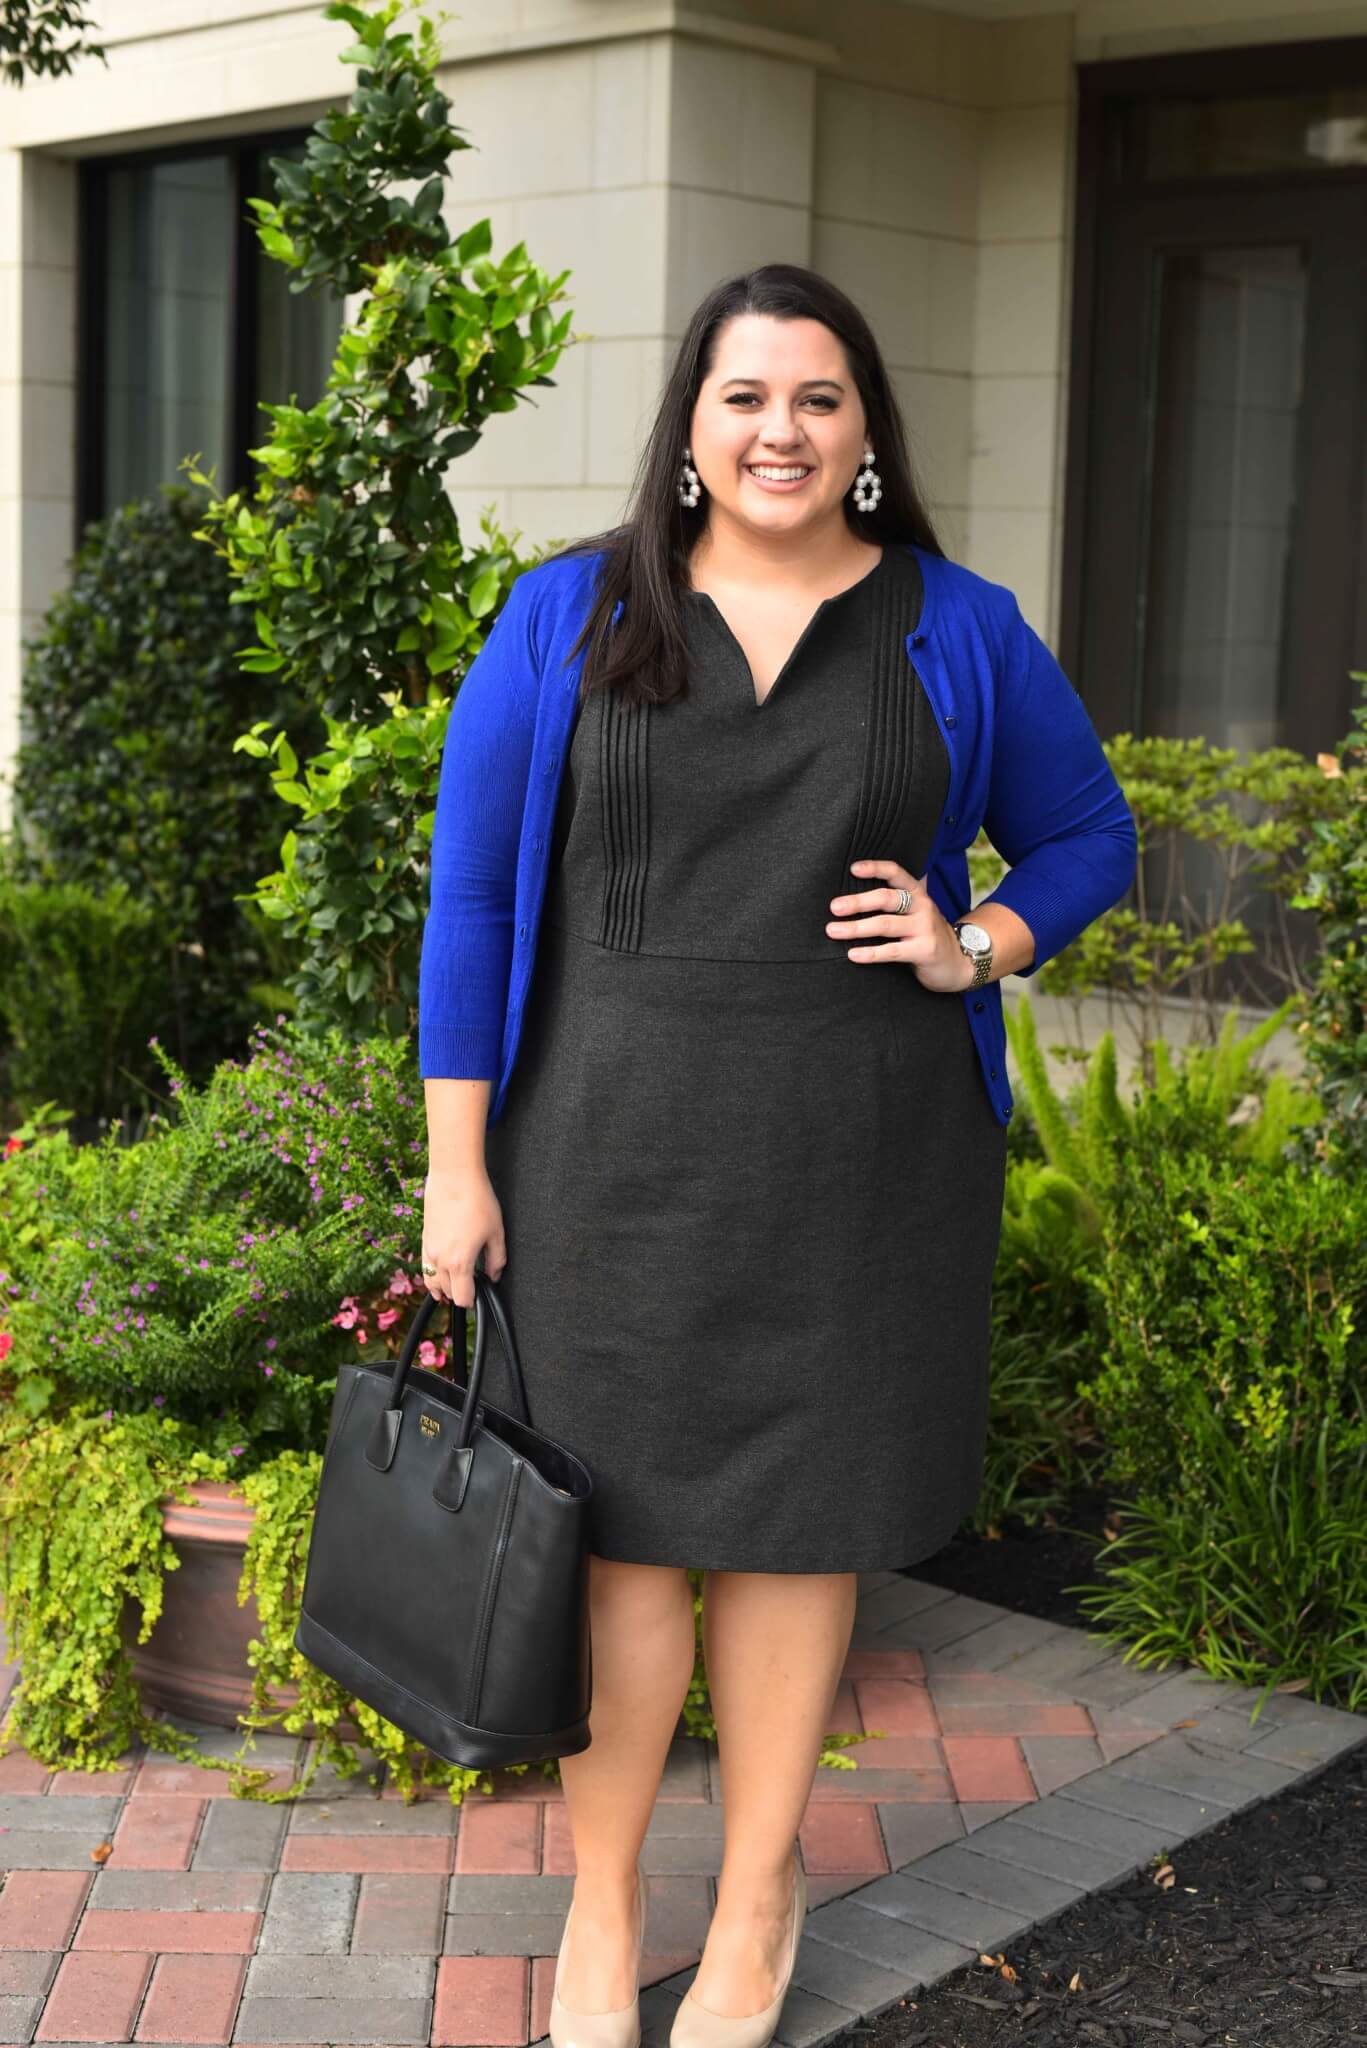 I'm sharing my favorite plus size clothing rental service from Gwynnie Bee and how I use it to look chic at work and not wear the same thing multiple times.